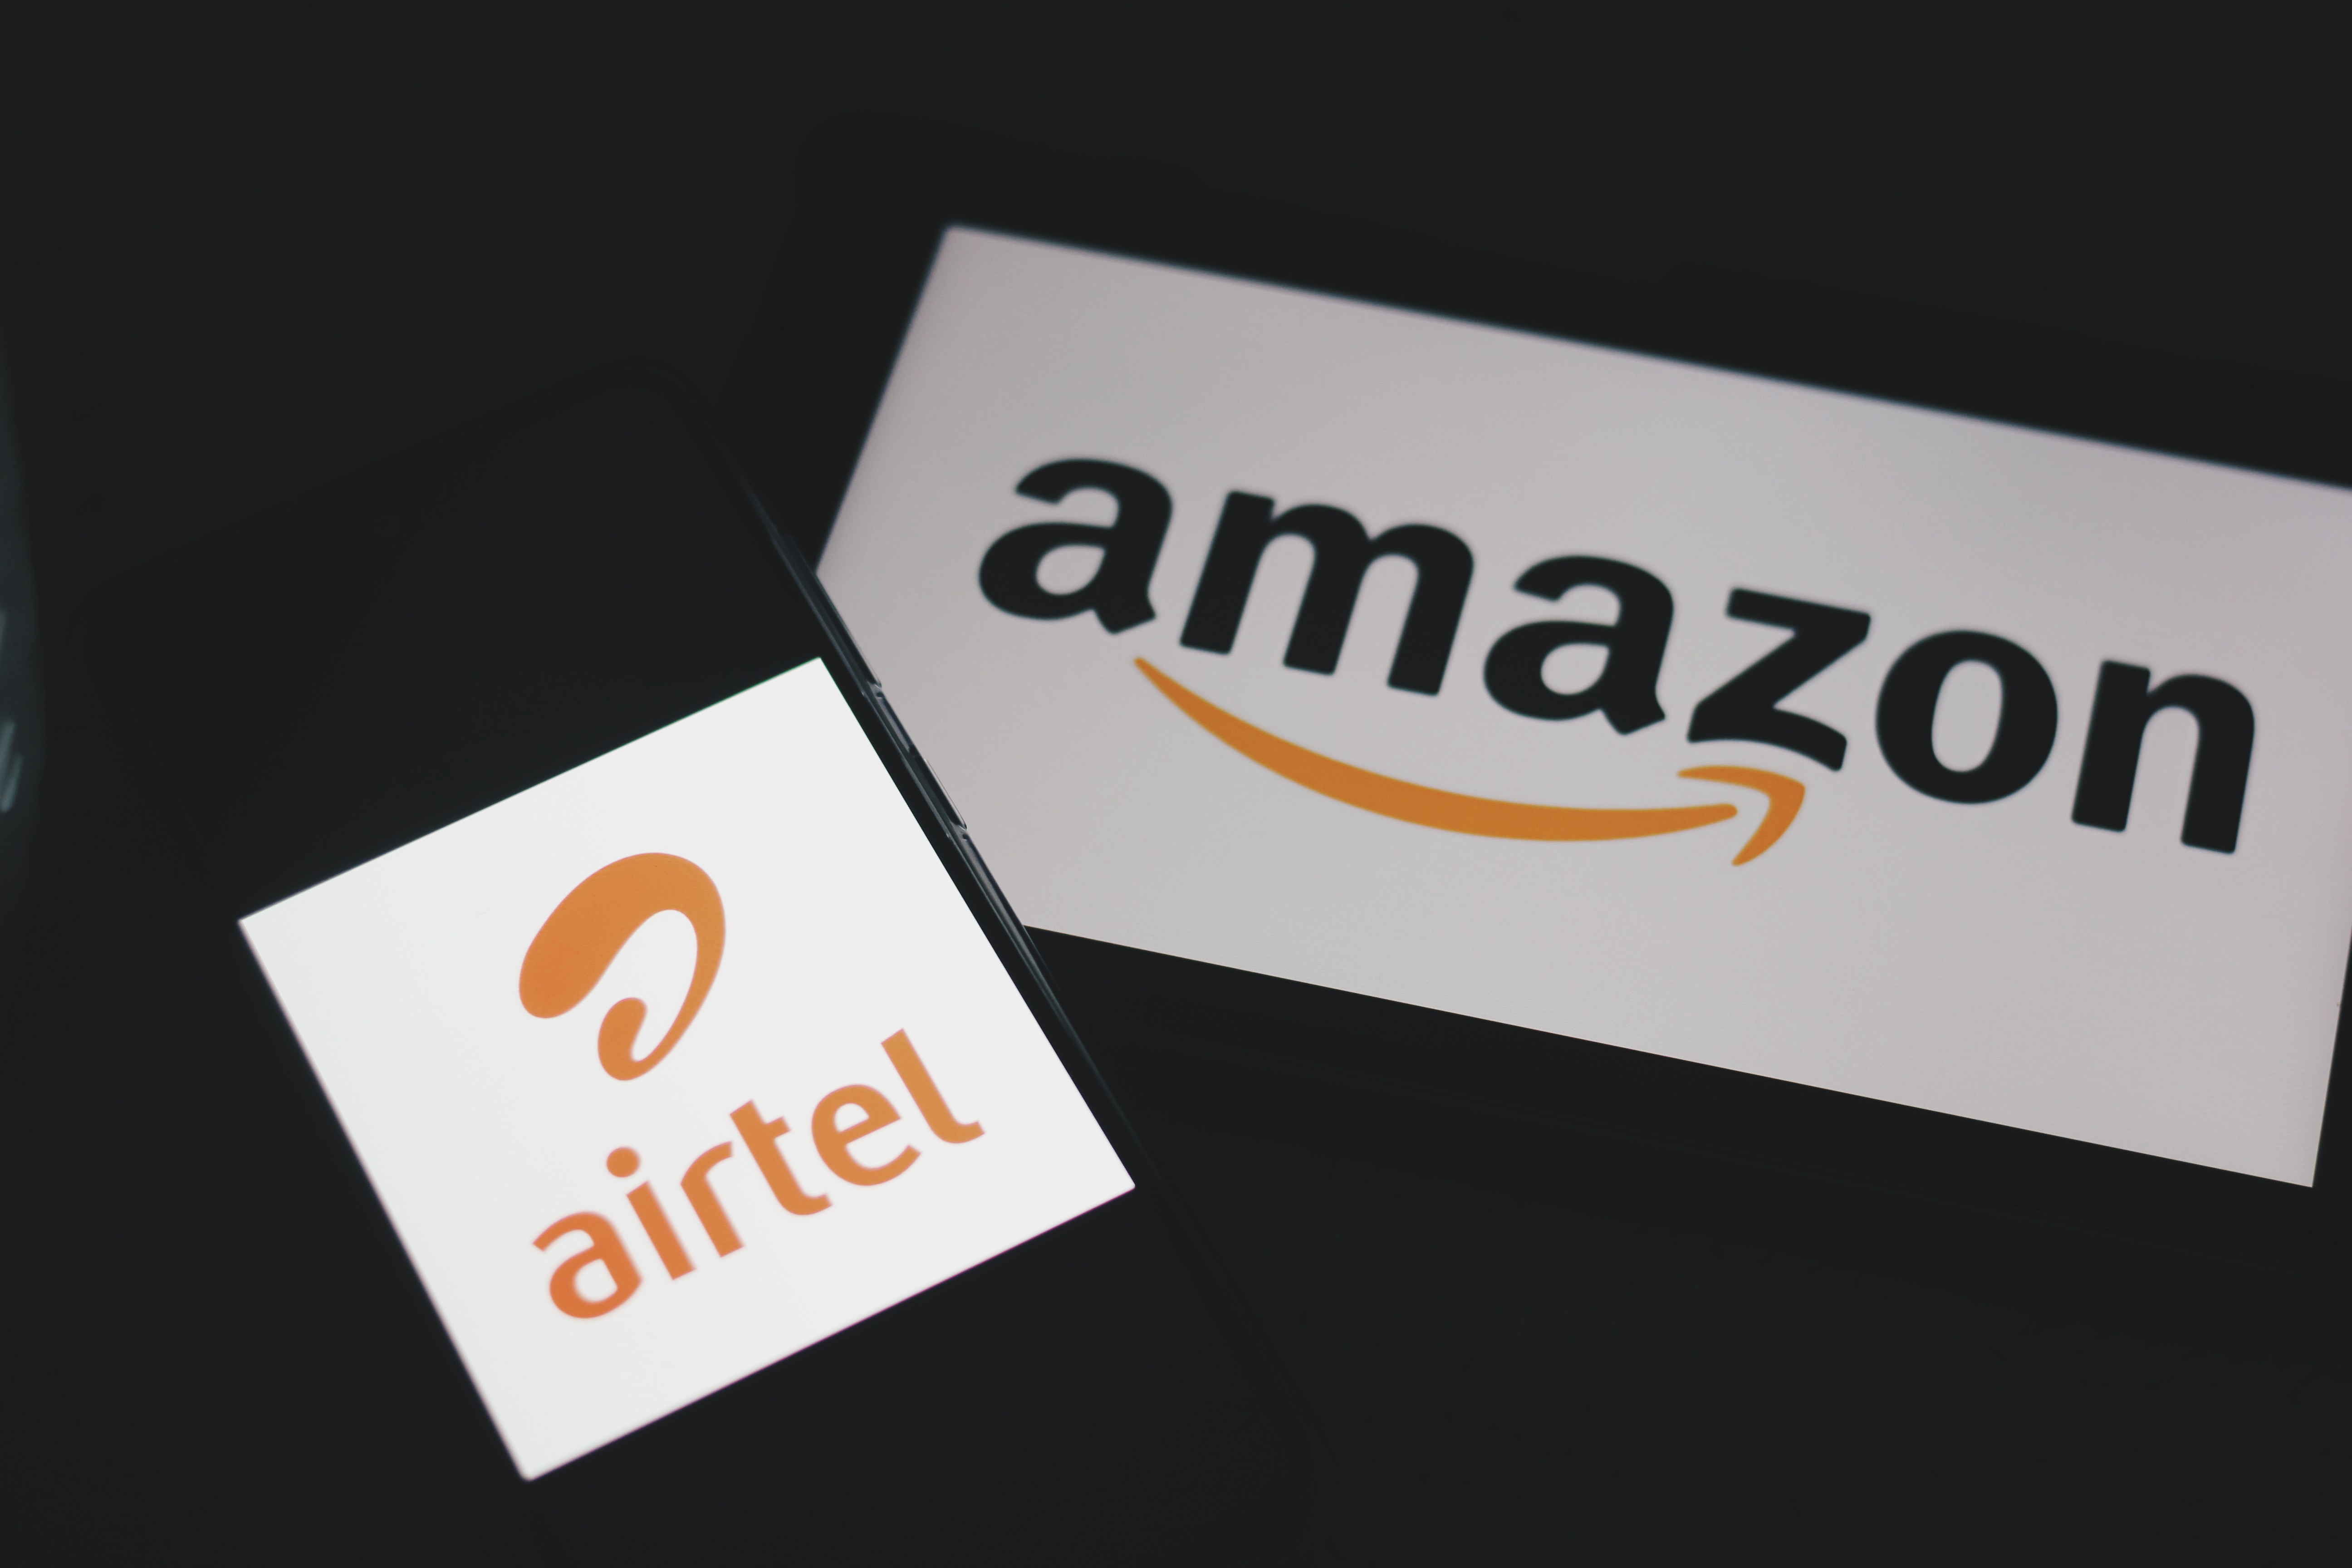 Amazon Launches an Affordable, Mobile-Only Prime Video Plan in India with Partner Airtel